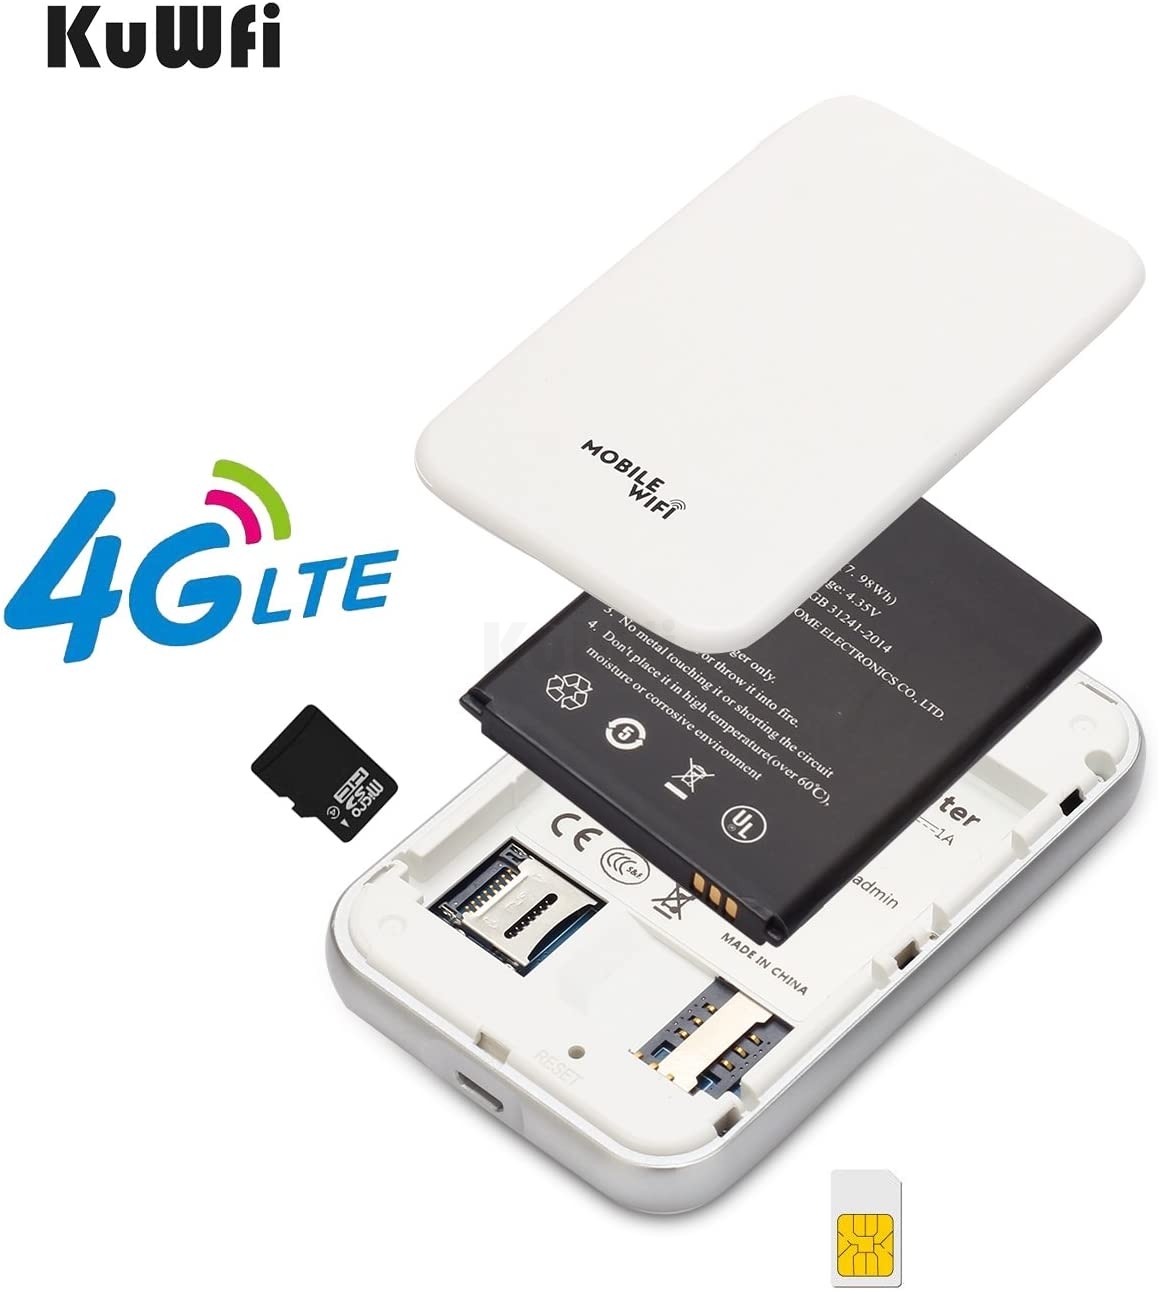 mobile hotspot device for travel